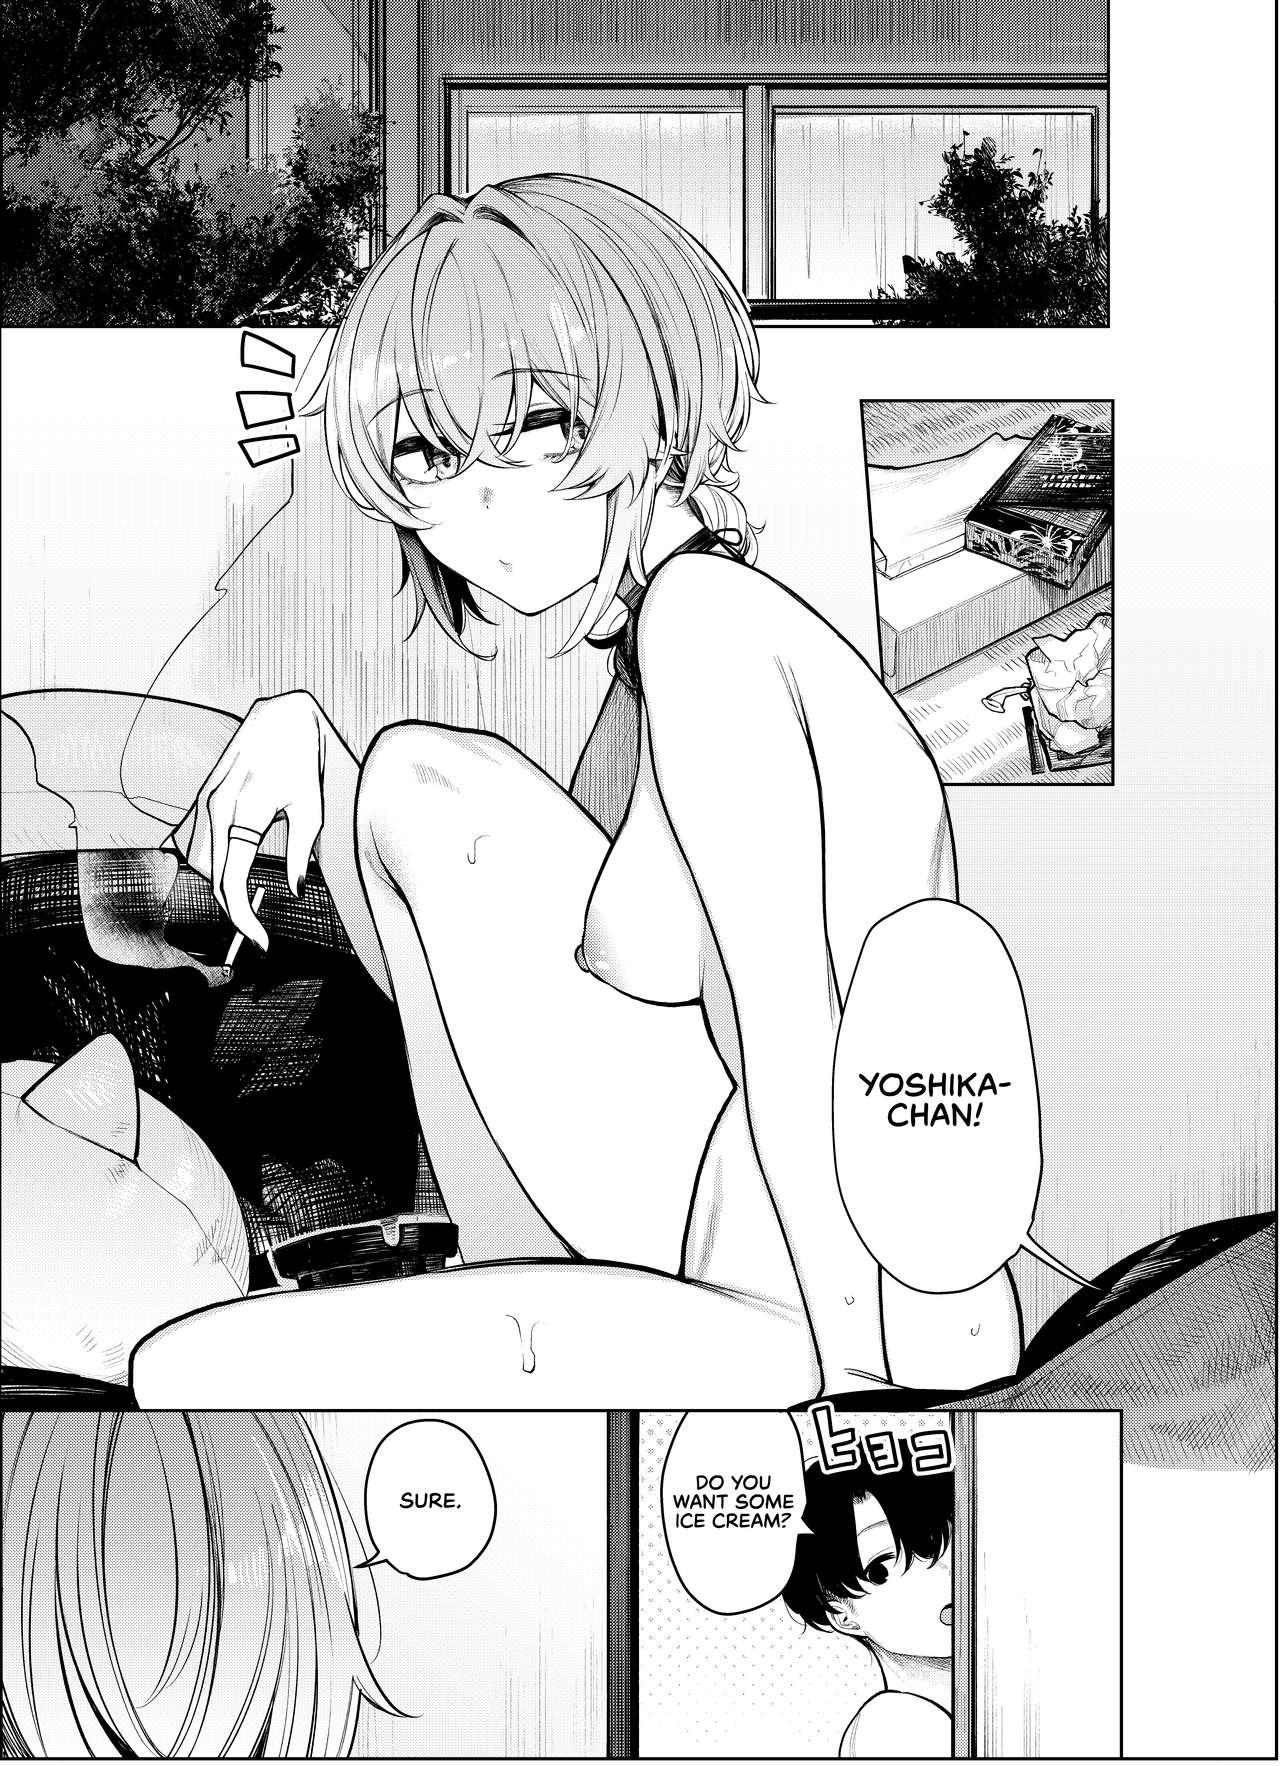 Tribbing Furyouppoi Kanojo to Daradara Omocha de Mou Ikkai. | Leisurely Playing With Sex Toys With My Delinquent-looking Girlfriend, Yet Again. - Original Stepbrother - Page 6